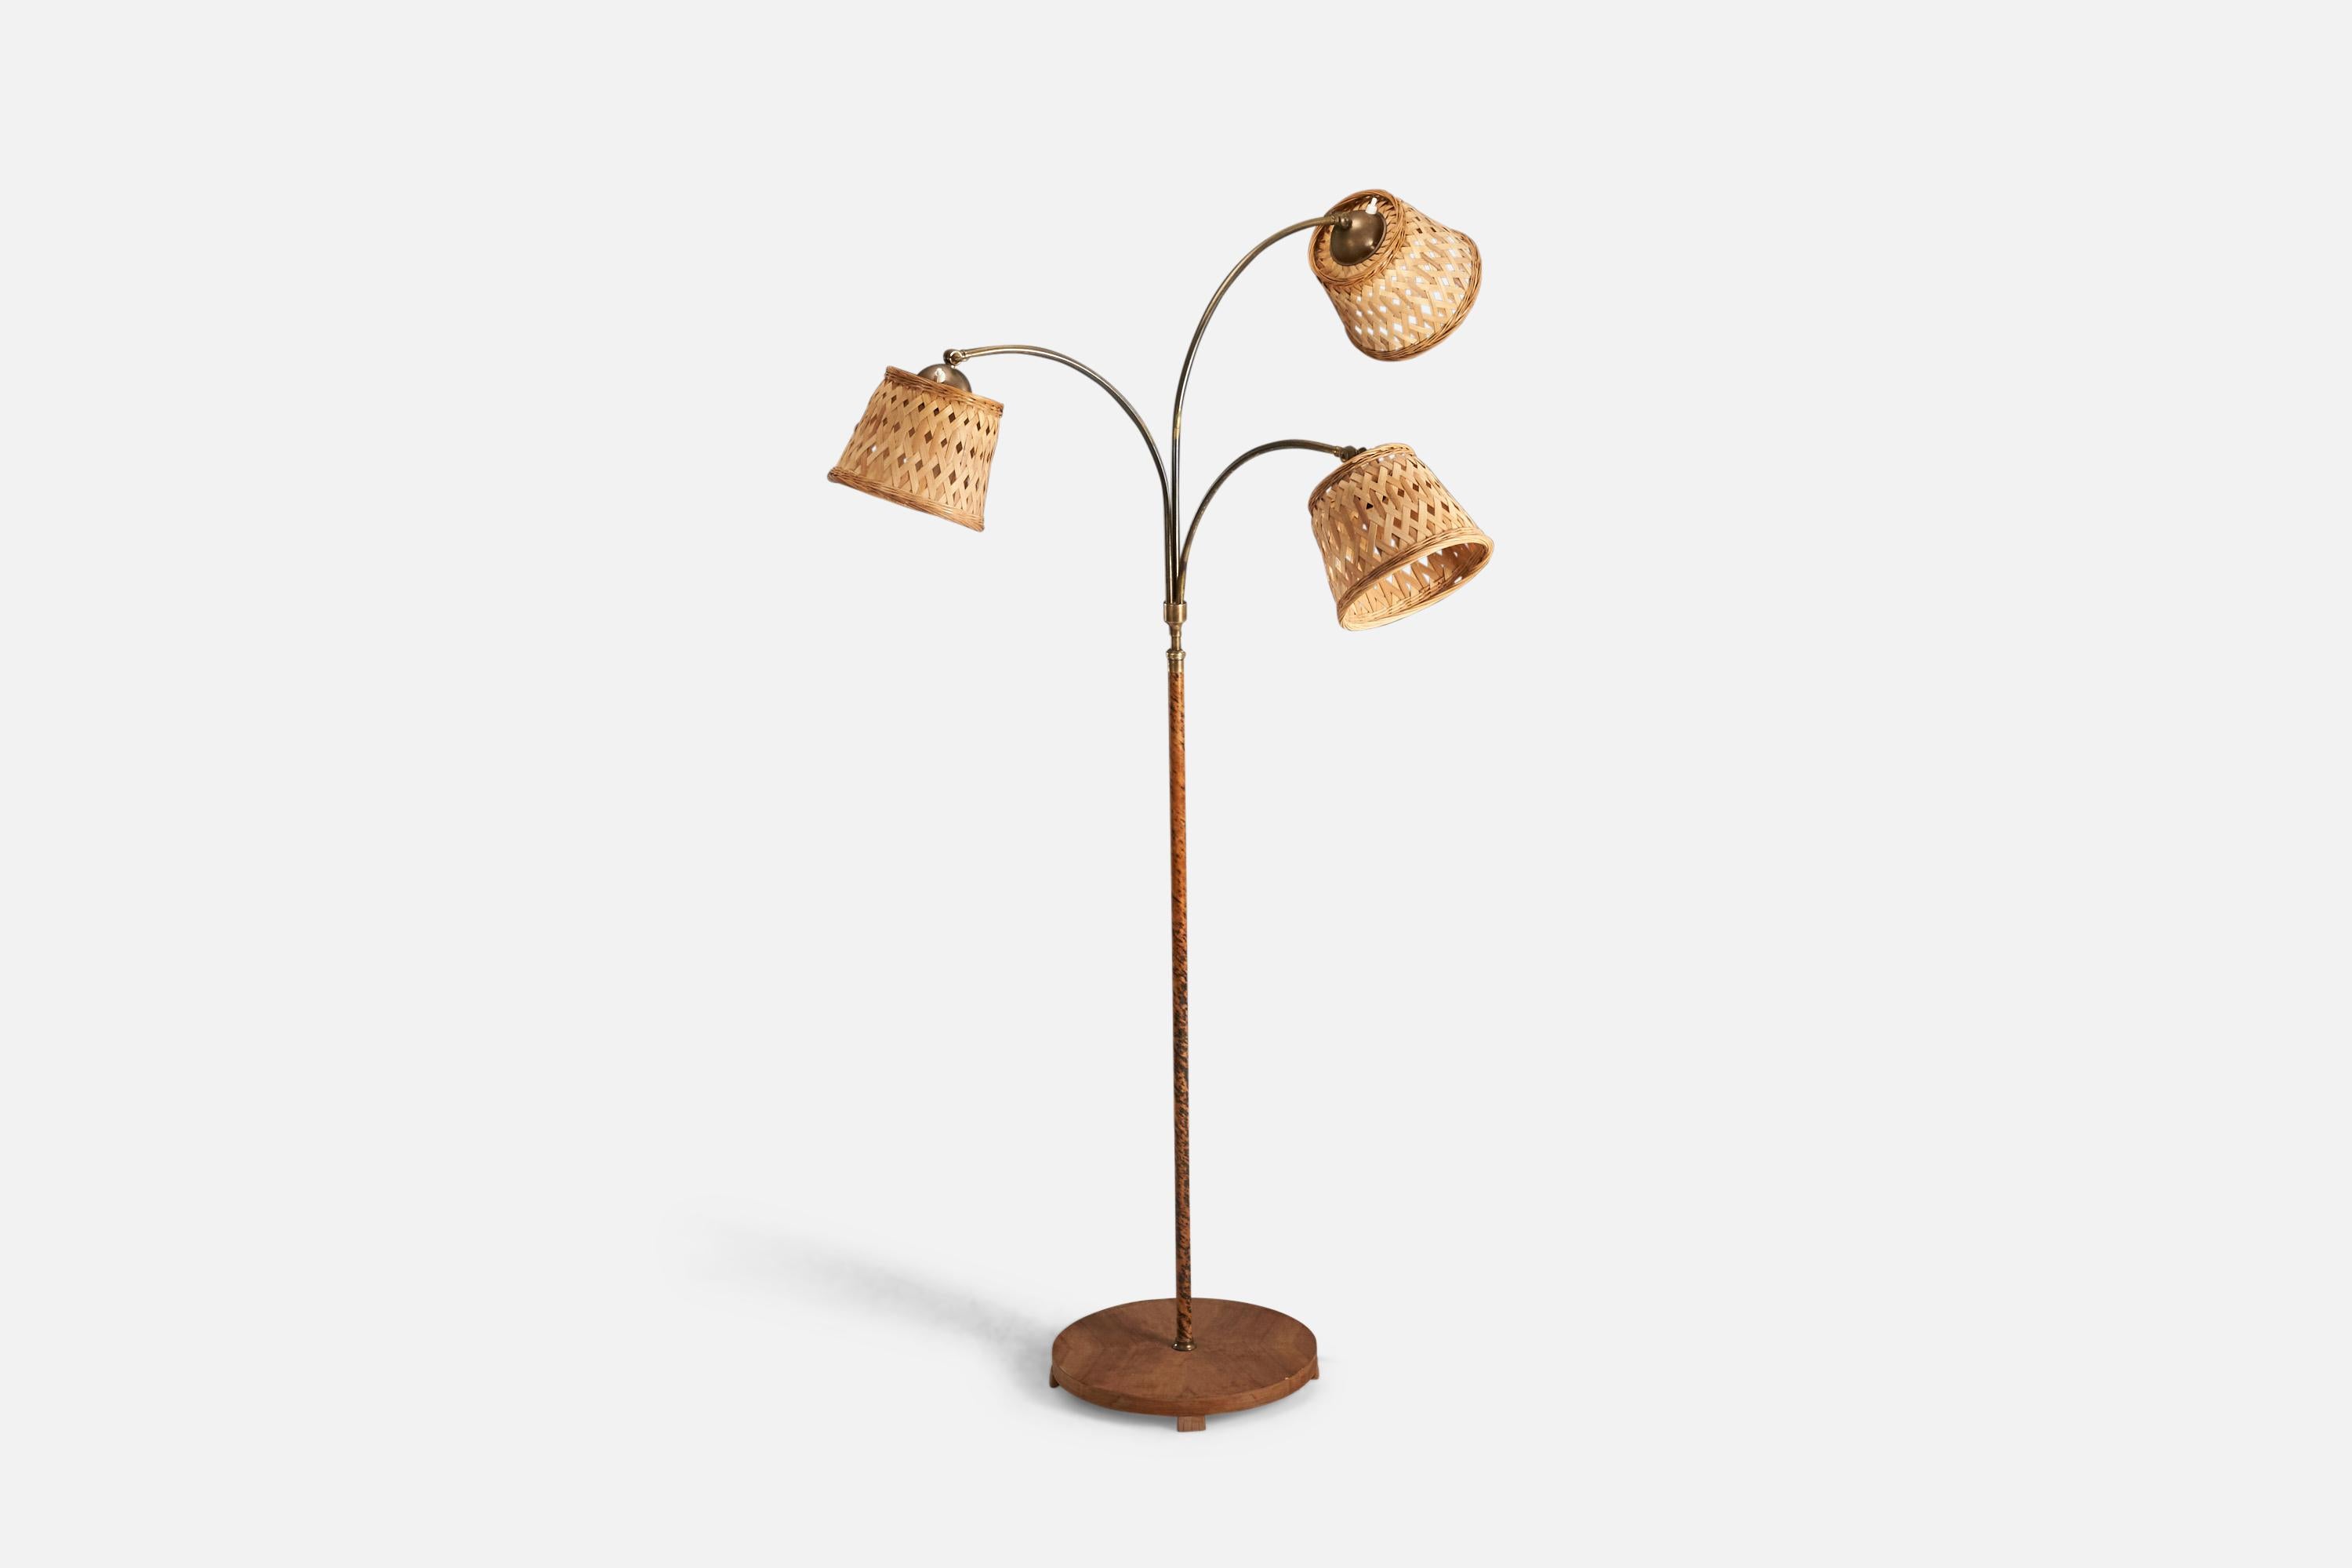 A wood, brass, wood veneer and rattan floor lamp designed and produced by a Swedish Designer, Sweden, 1930s.

Sockets take standard E-26 medium base bulbs.

There is no maximum wattage stated on the fixture.